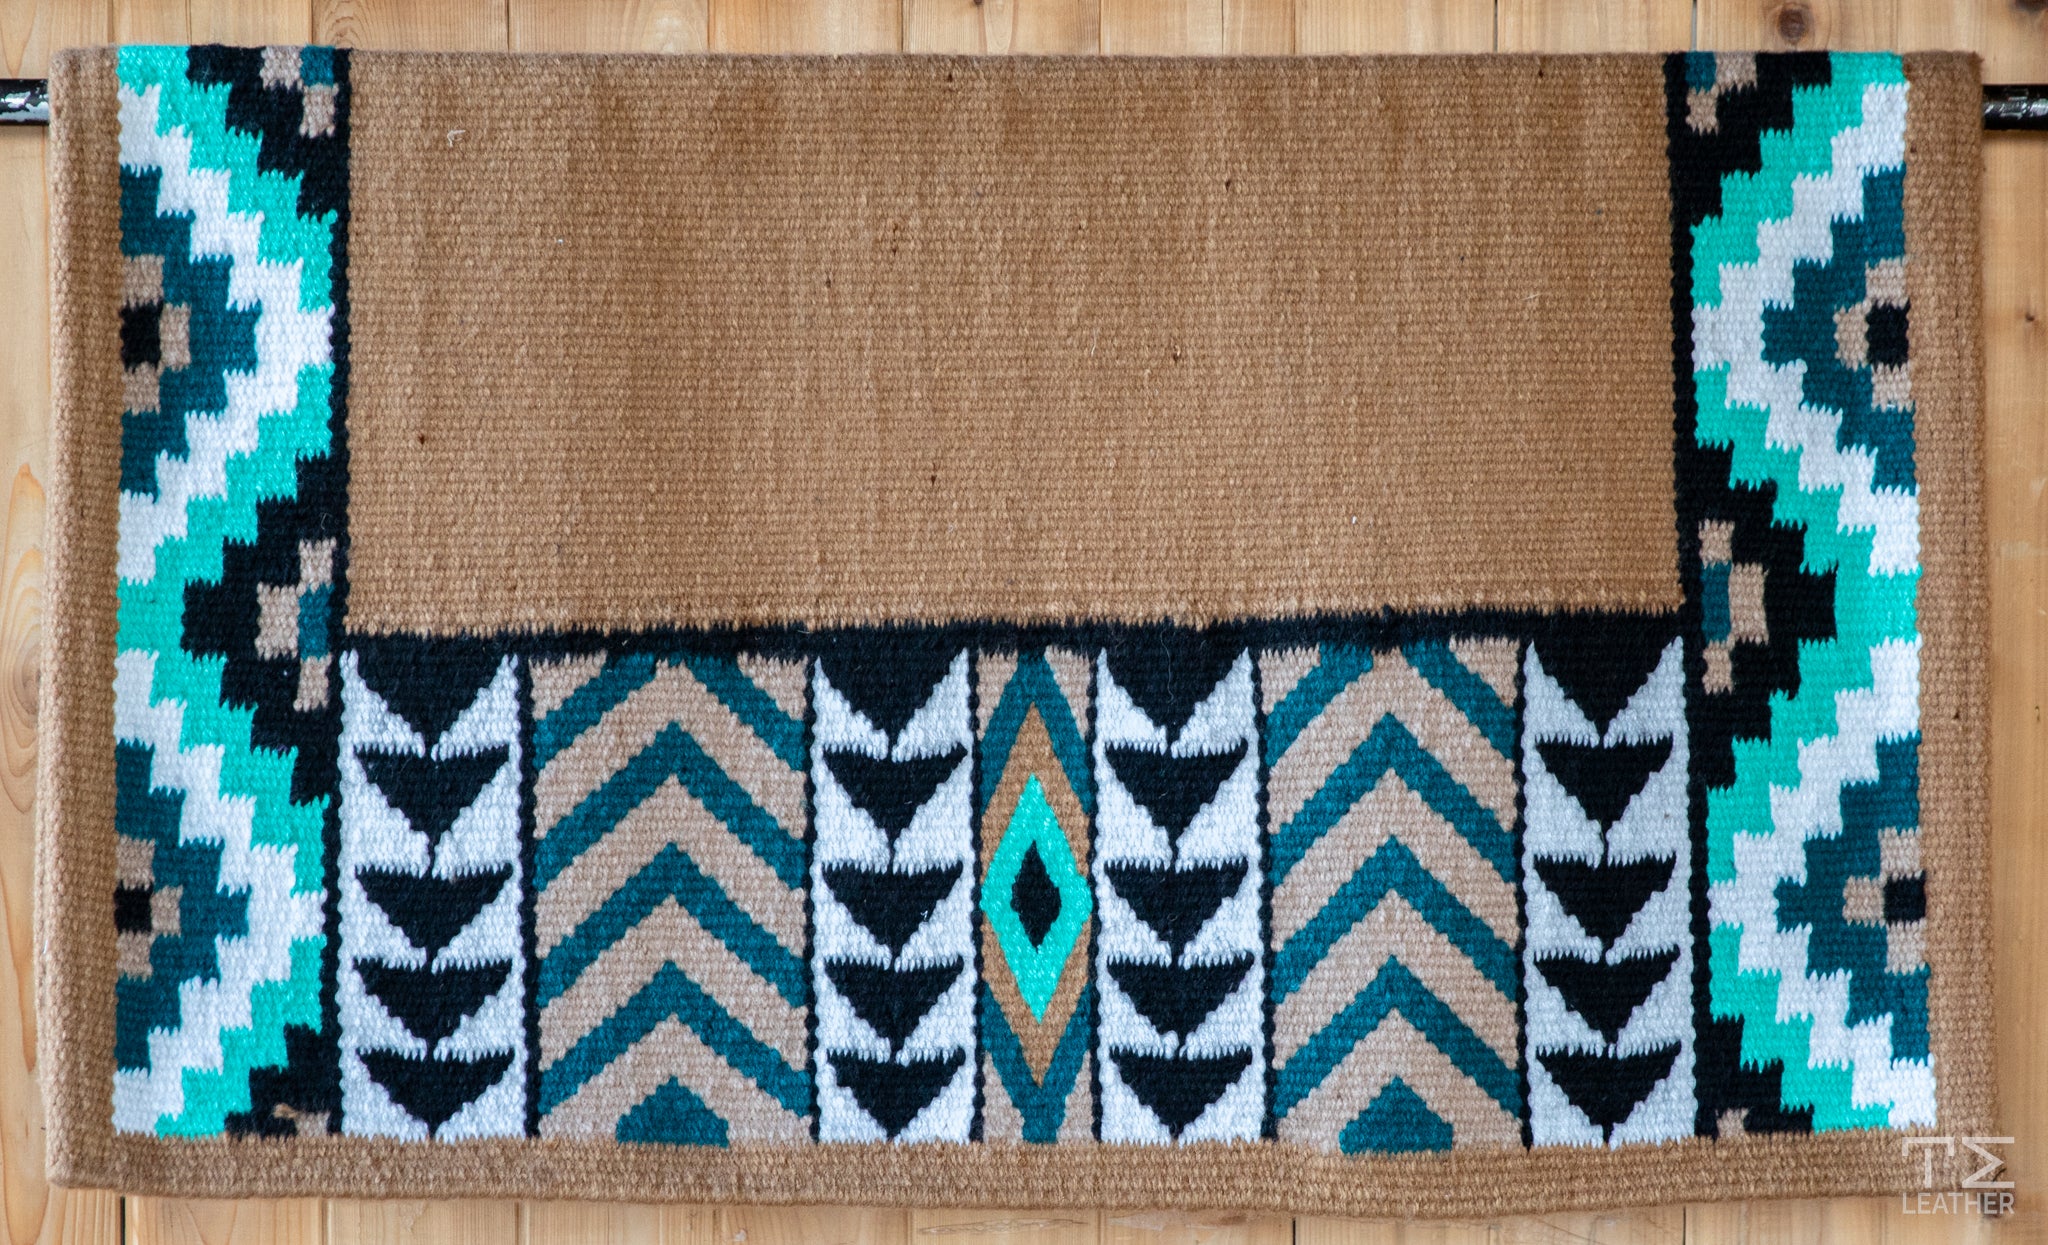 Sand, Teal, Turquoise, Black w/ White Accents Flat Show Blanket